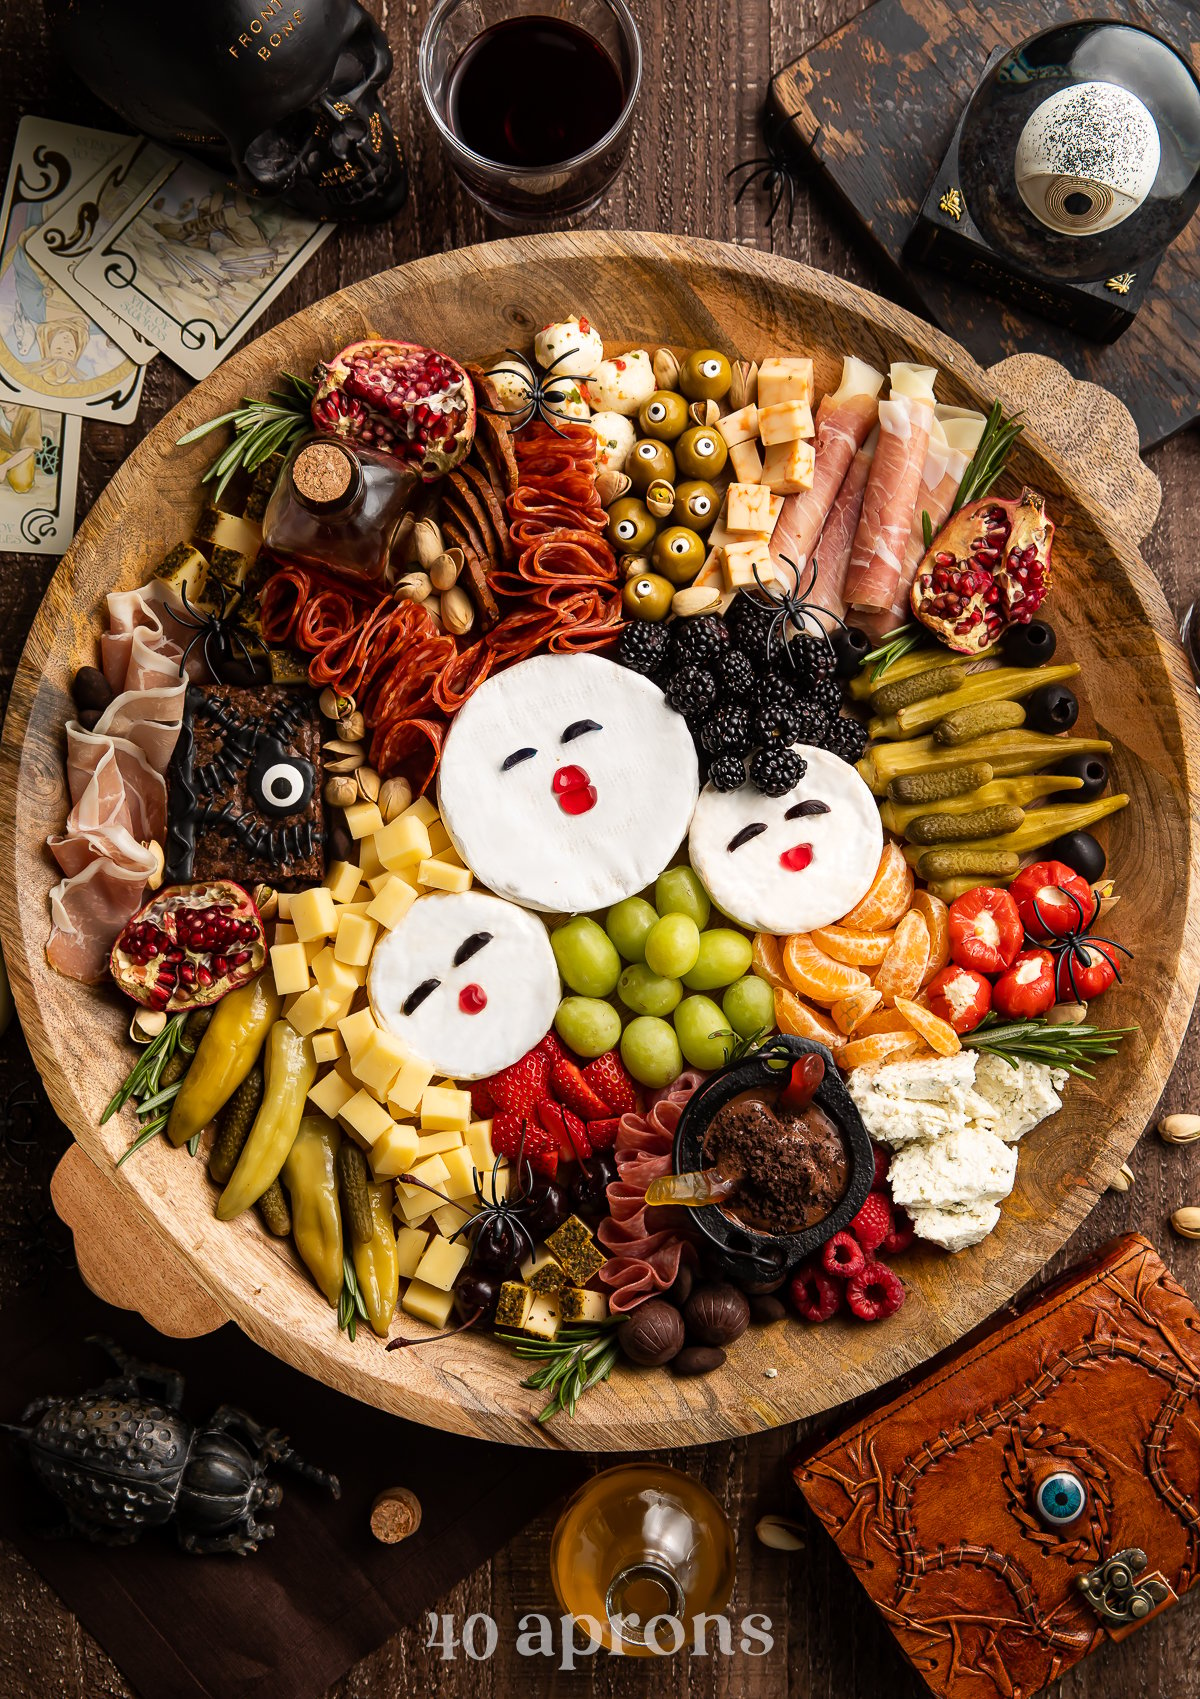 Overhead view of a Hocus Pocus themed charcuterie board with brie, fruit, cornichon, stuffed red peppers, marinated mozzarella, and other spooky snacks.